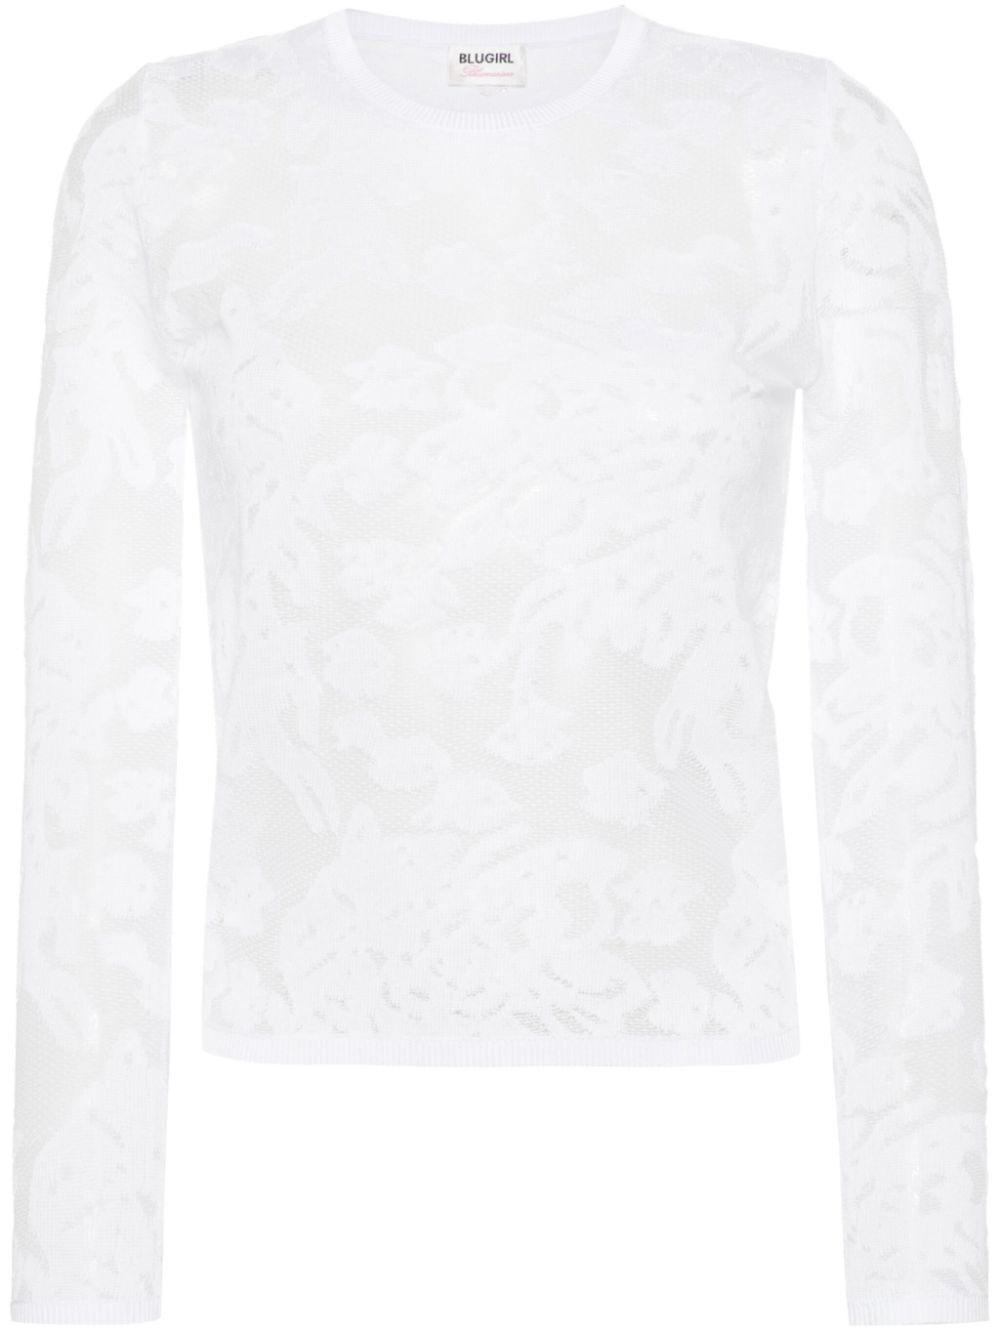 Blugirl Stretch Lace-construction Blouse In White